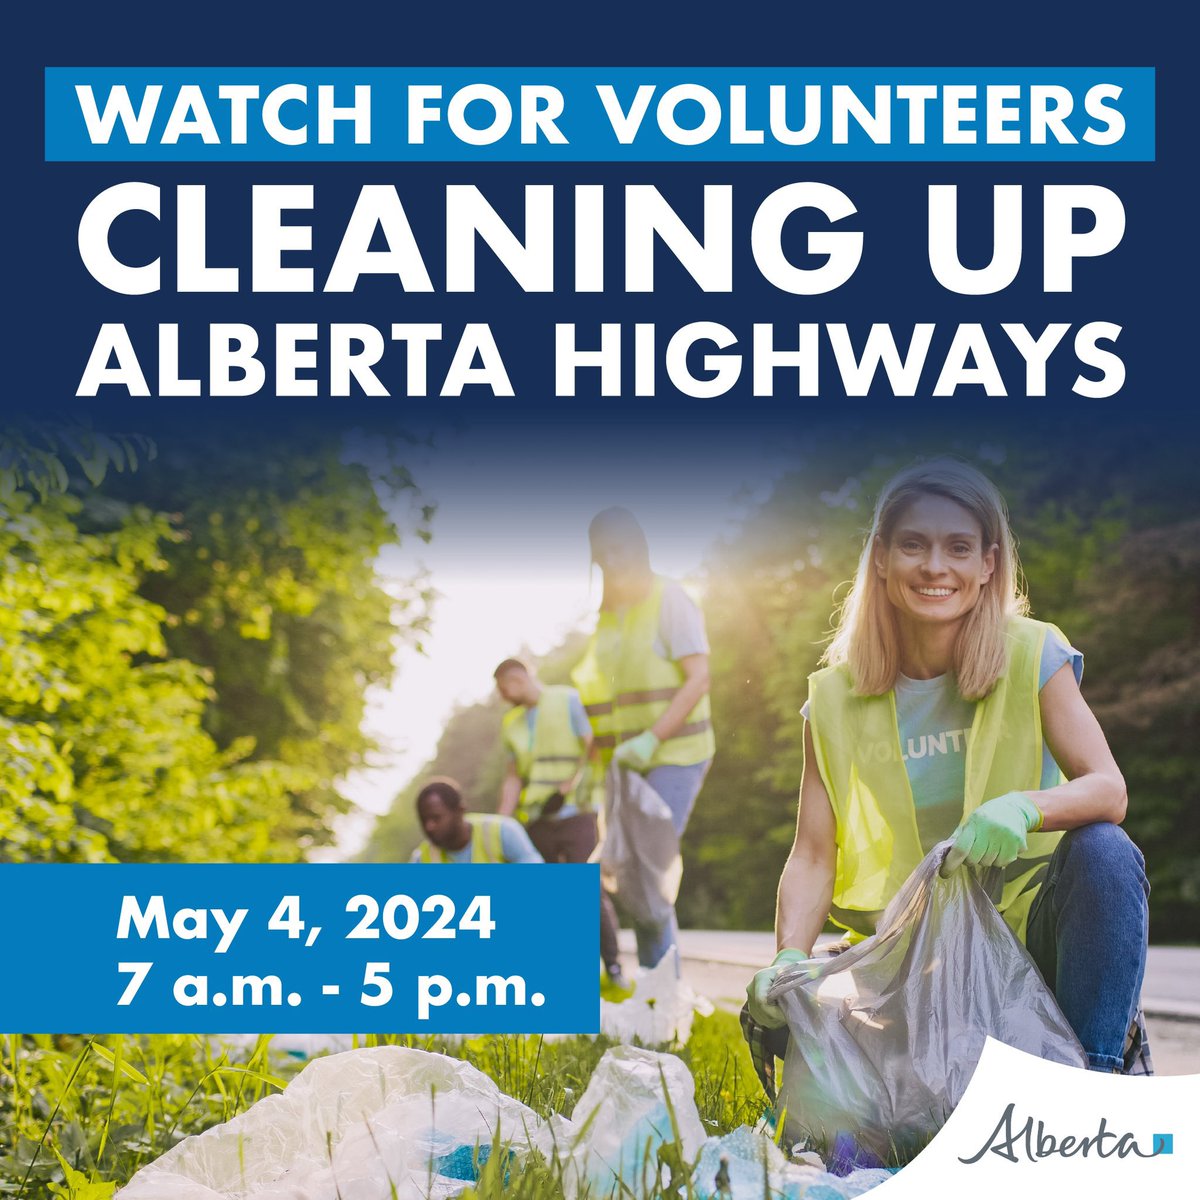 Reminder if you’re on the highways today to please slow down and be mindful of our volunteer cleanup crews! A number of groups, including local 4-H clubs, will be collecting trash in orange safety vests between 7am and 5pm today. Big thank you to all the volunteers and 4-H…